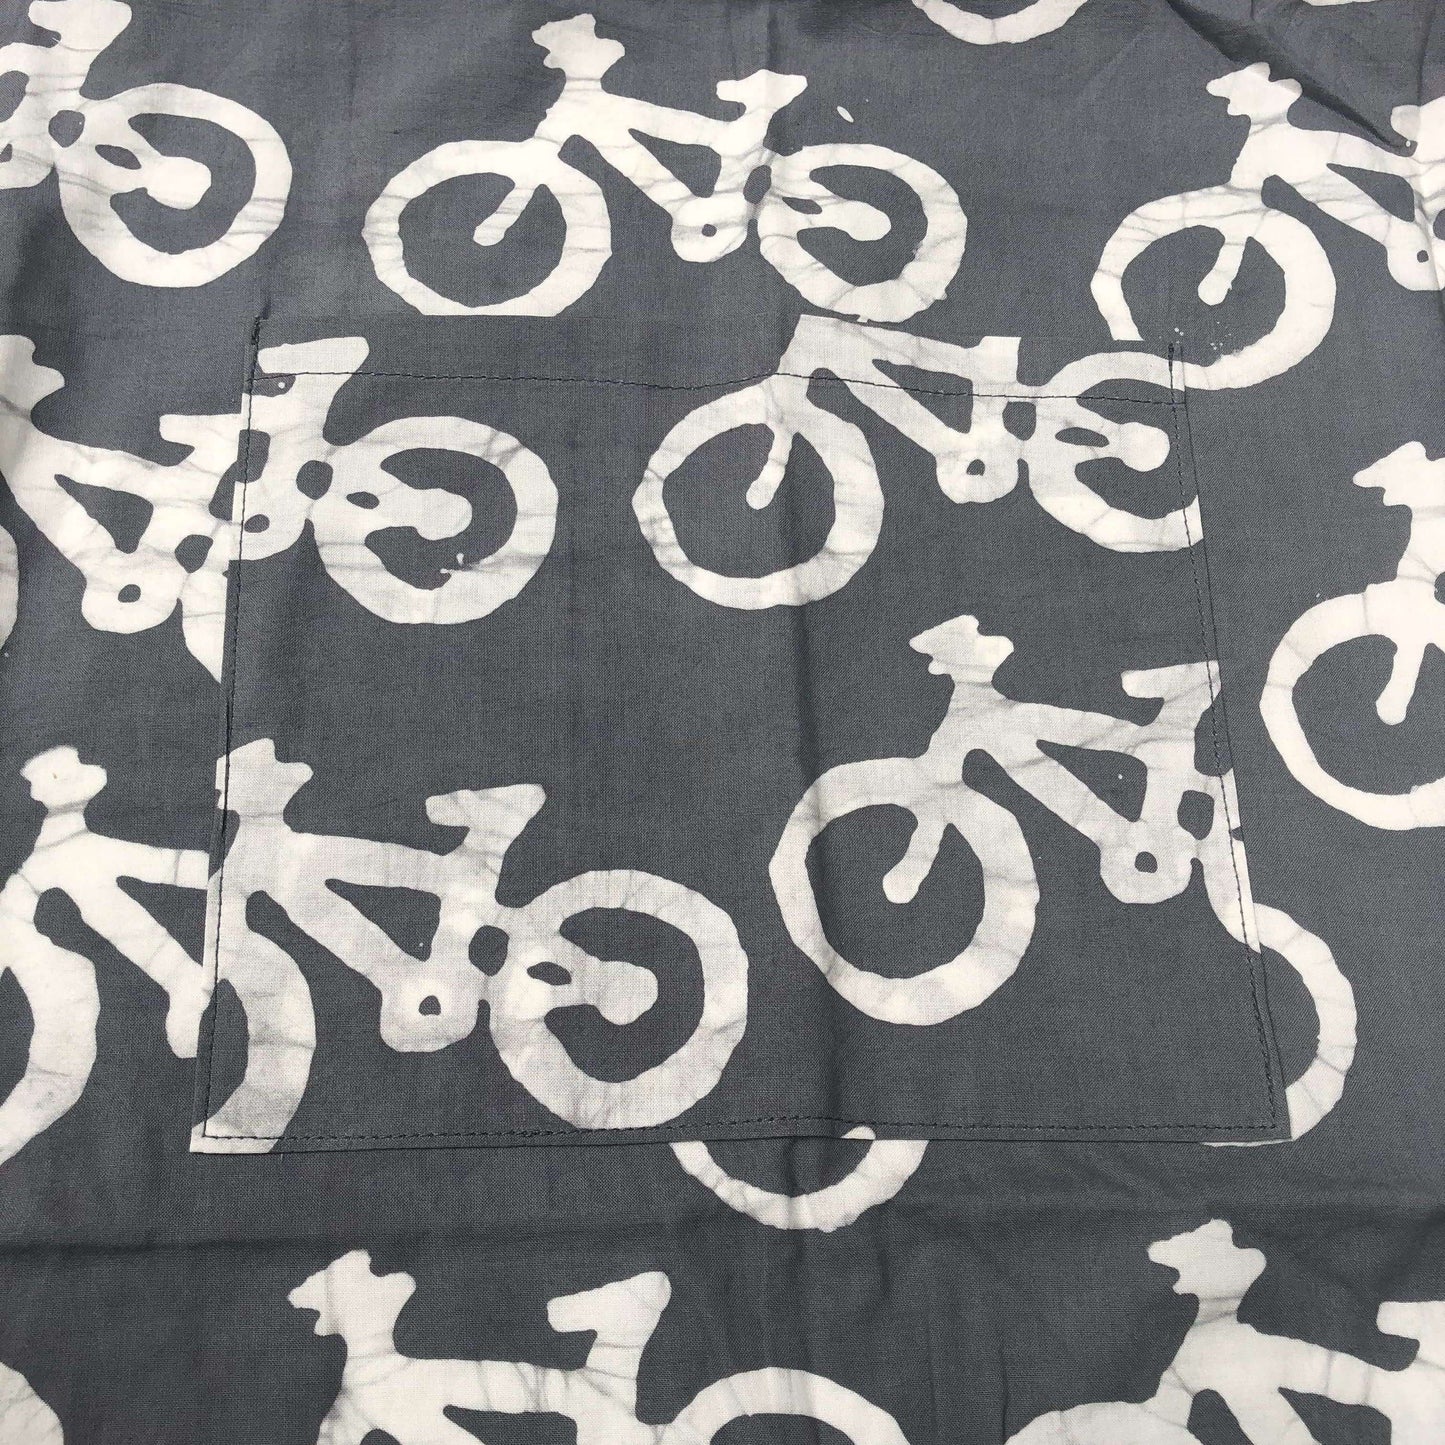 in-jeen-yuhs bicycle apron